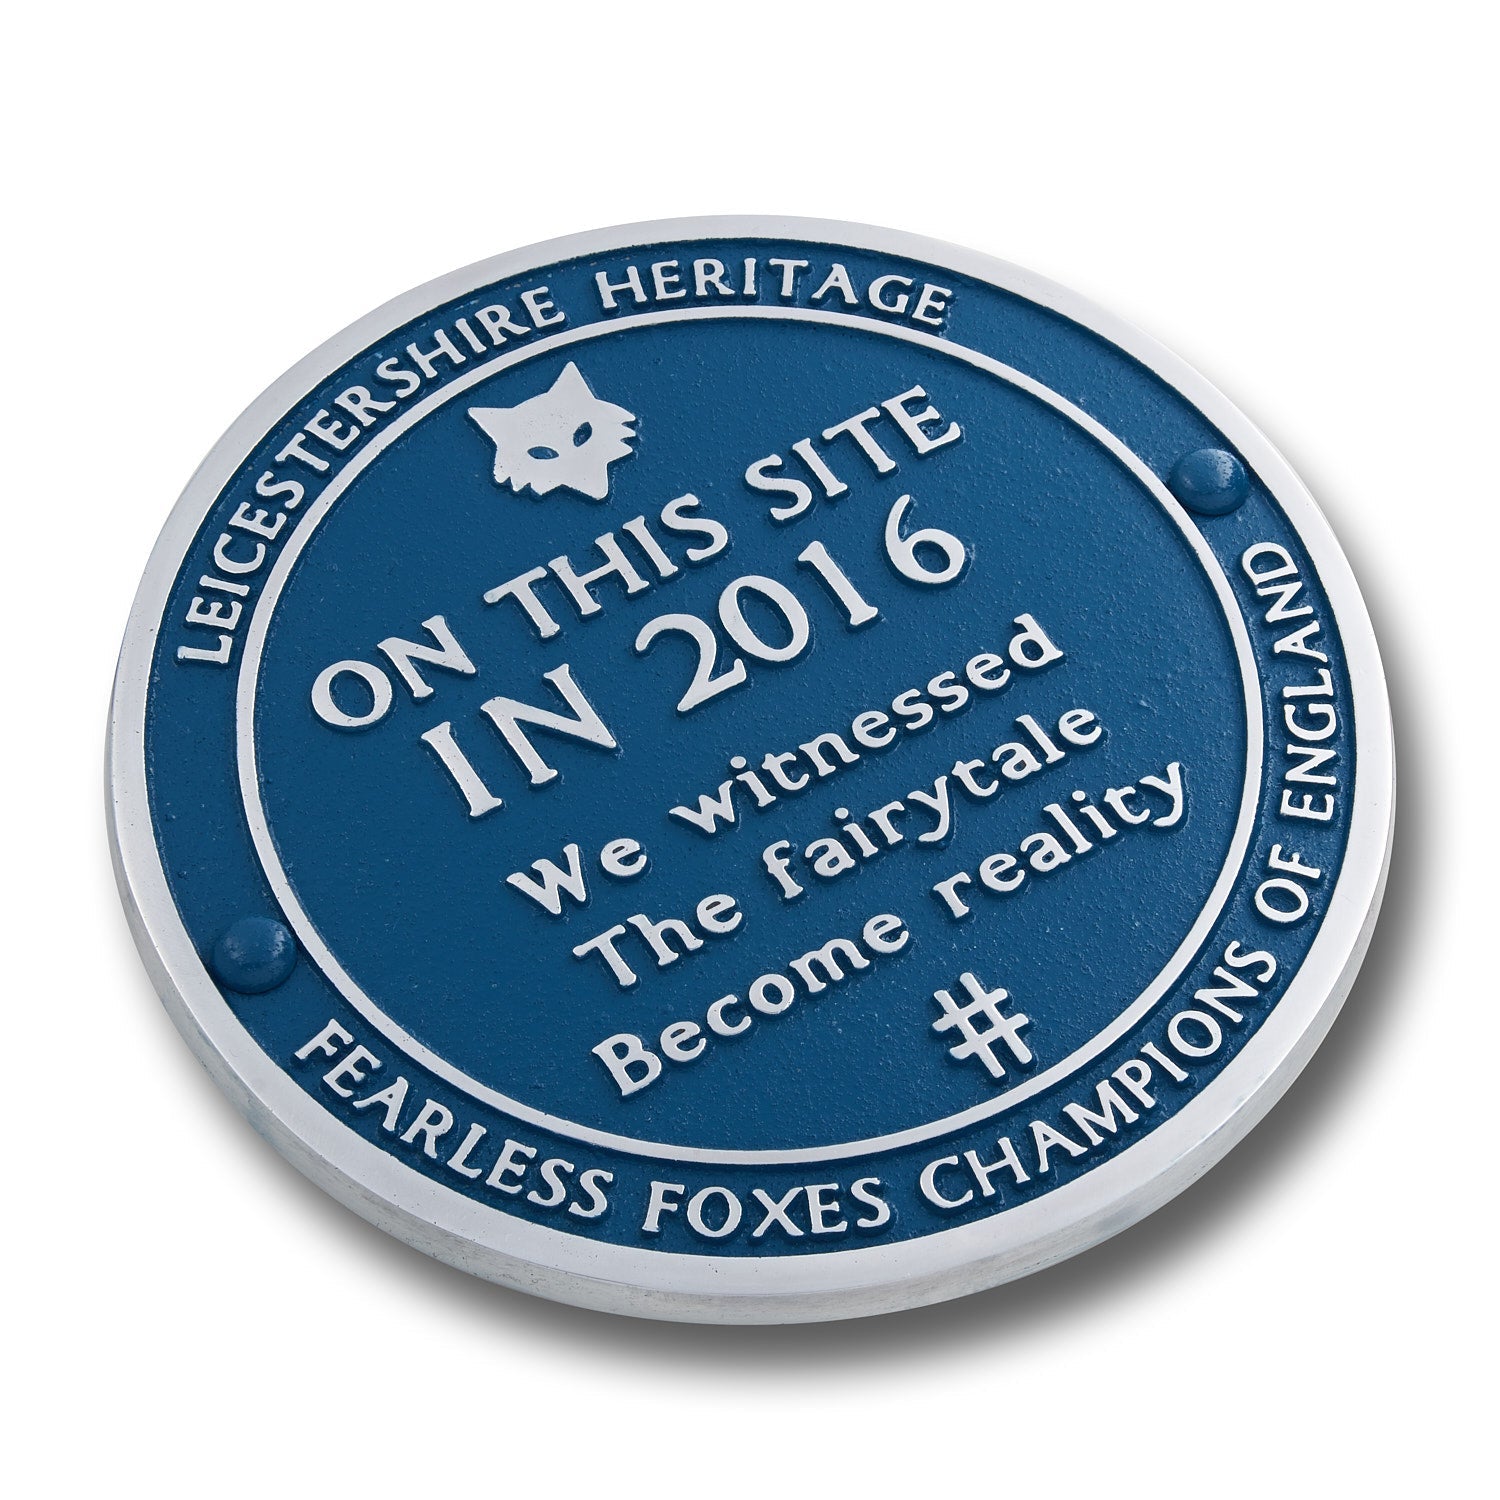 Leicester Champions Football Plaque - The Metal Foundry